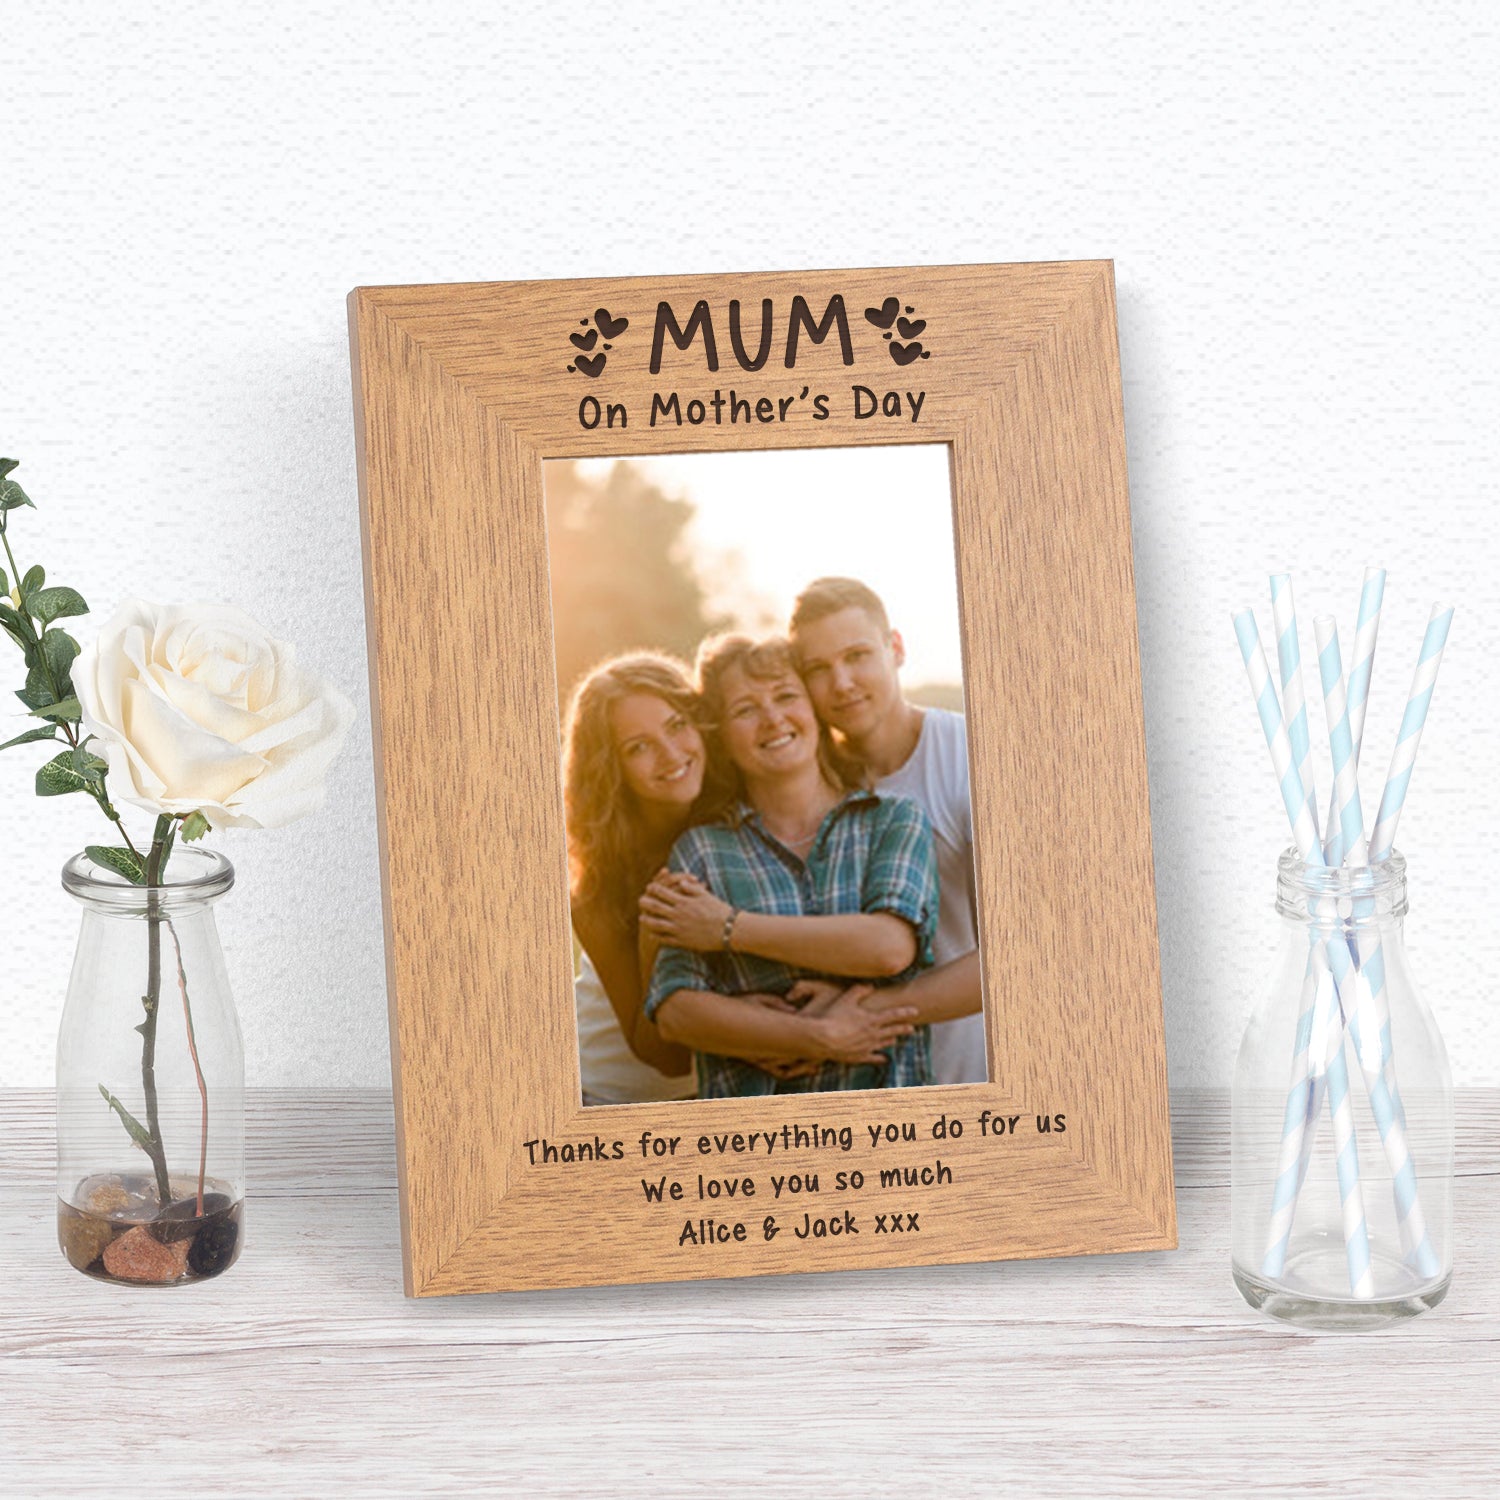 Mum on Mothers Day Photo Frame - Personalised